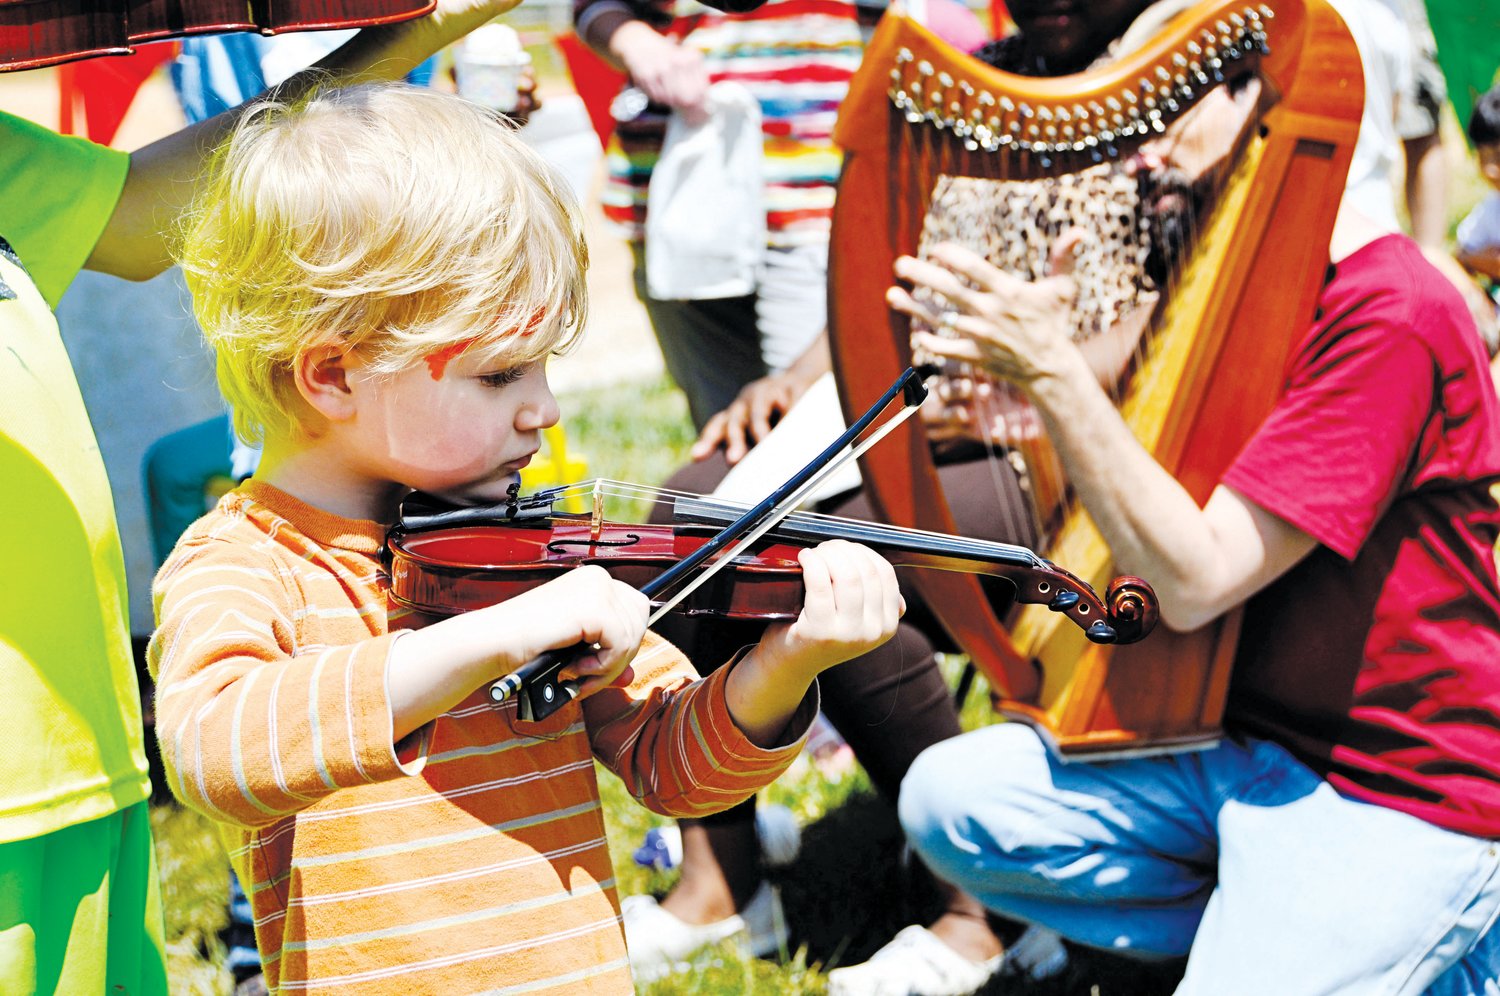 A child tries out a stringed instrument at ClydeFEST's High Strung Instrument Petting Zoo. Named after Bynum folk art legend Clyde Jones, the Chatham Arts Council’s ClydeFEST is a family-friendly day of hands-on arts immersion for children of all ages.